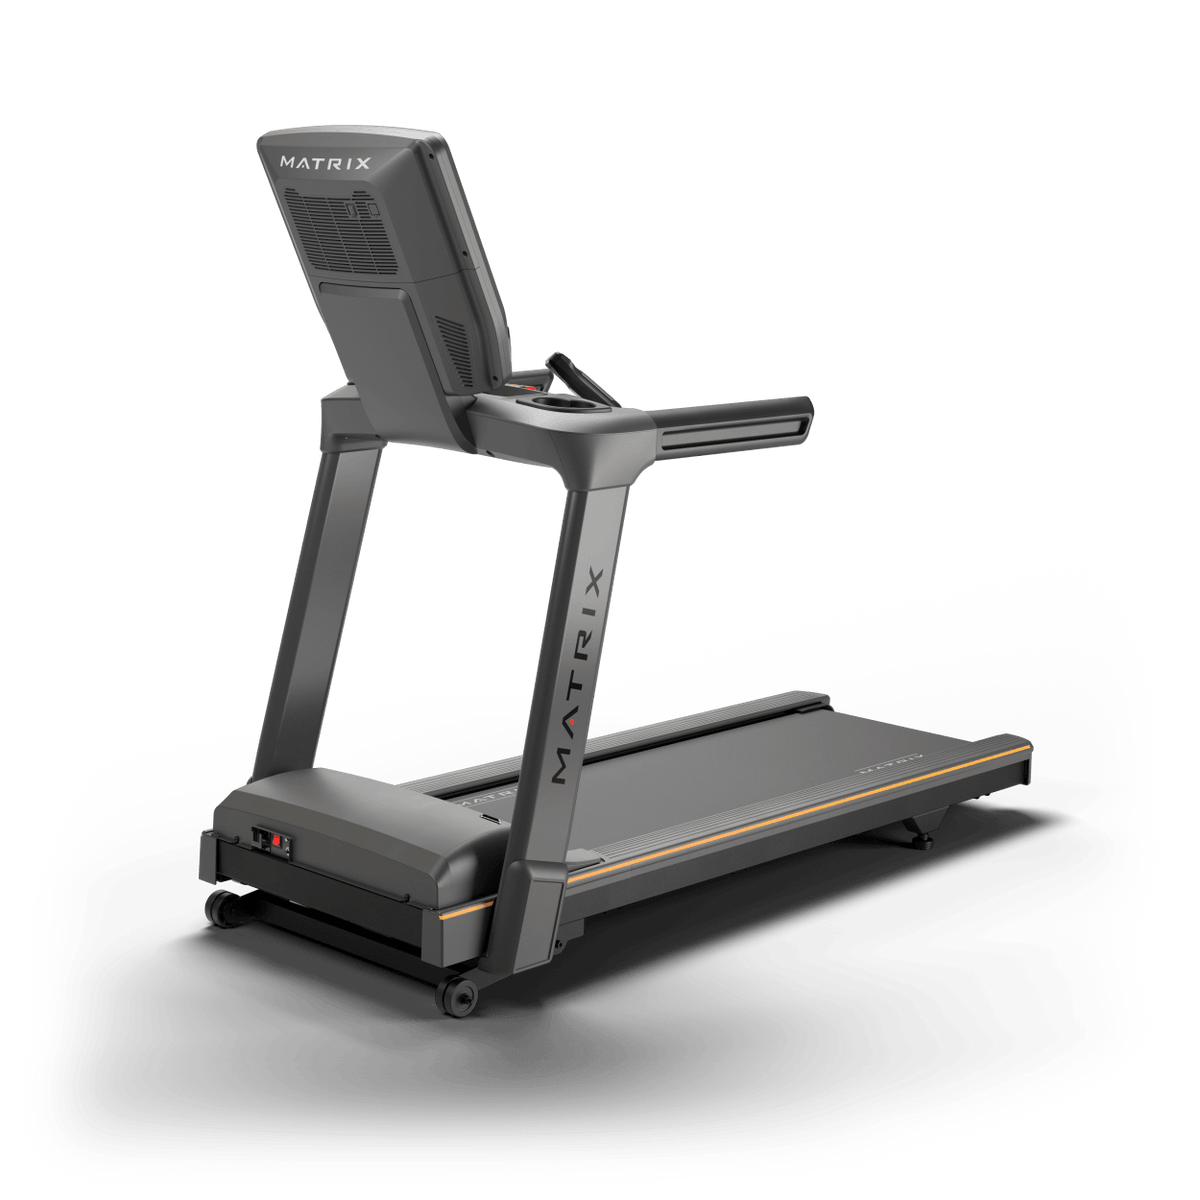 Matrix Fitness Lifestyle Treadmill with Touch XL Console rear view | Fitness Experience